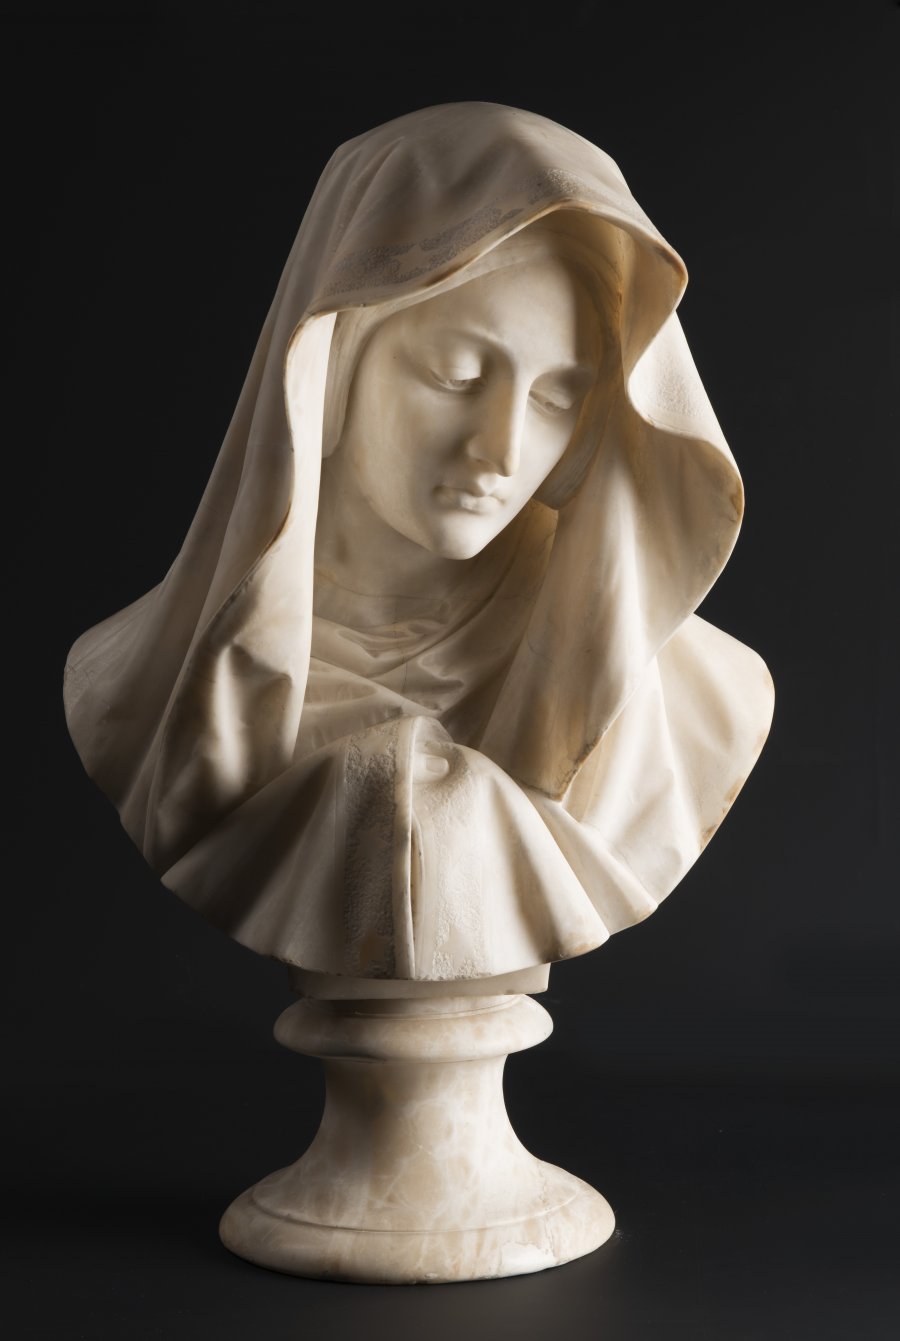 YOUNG LADY WITH A VEIL